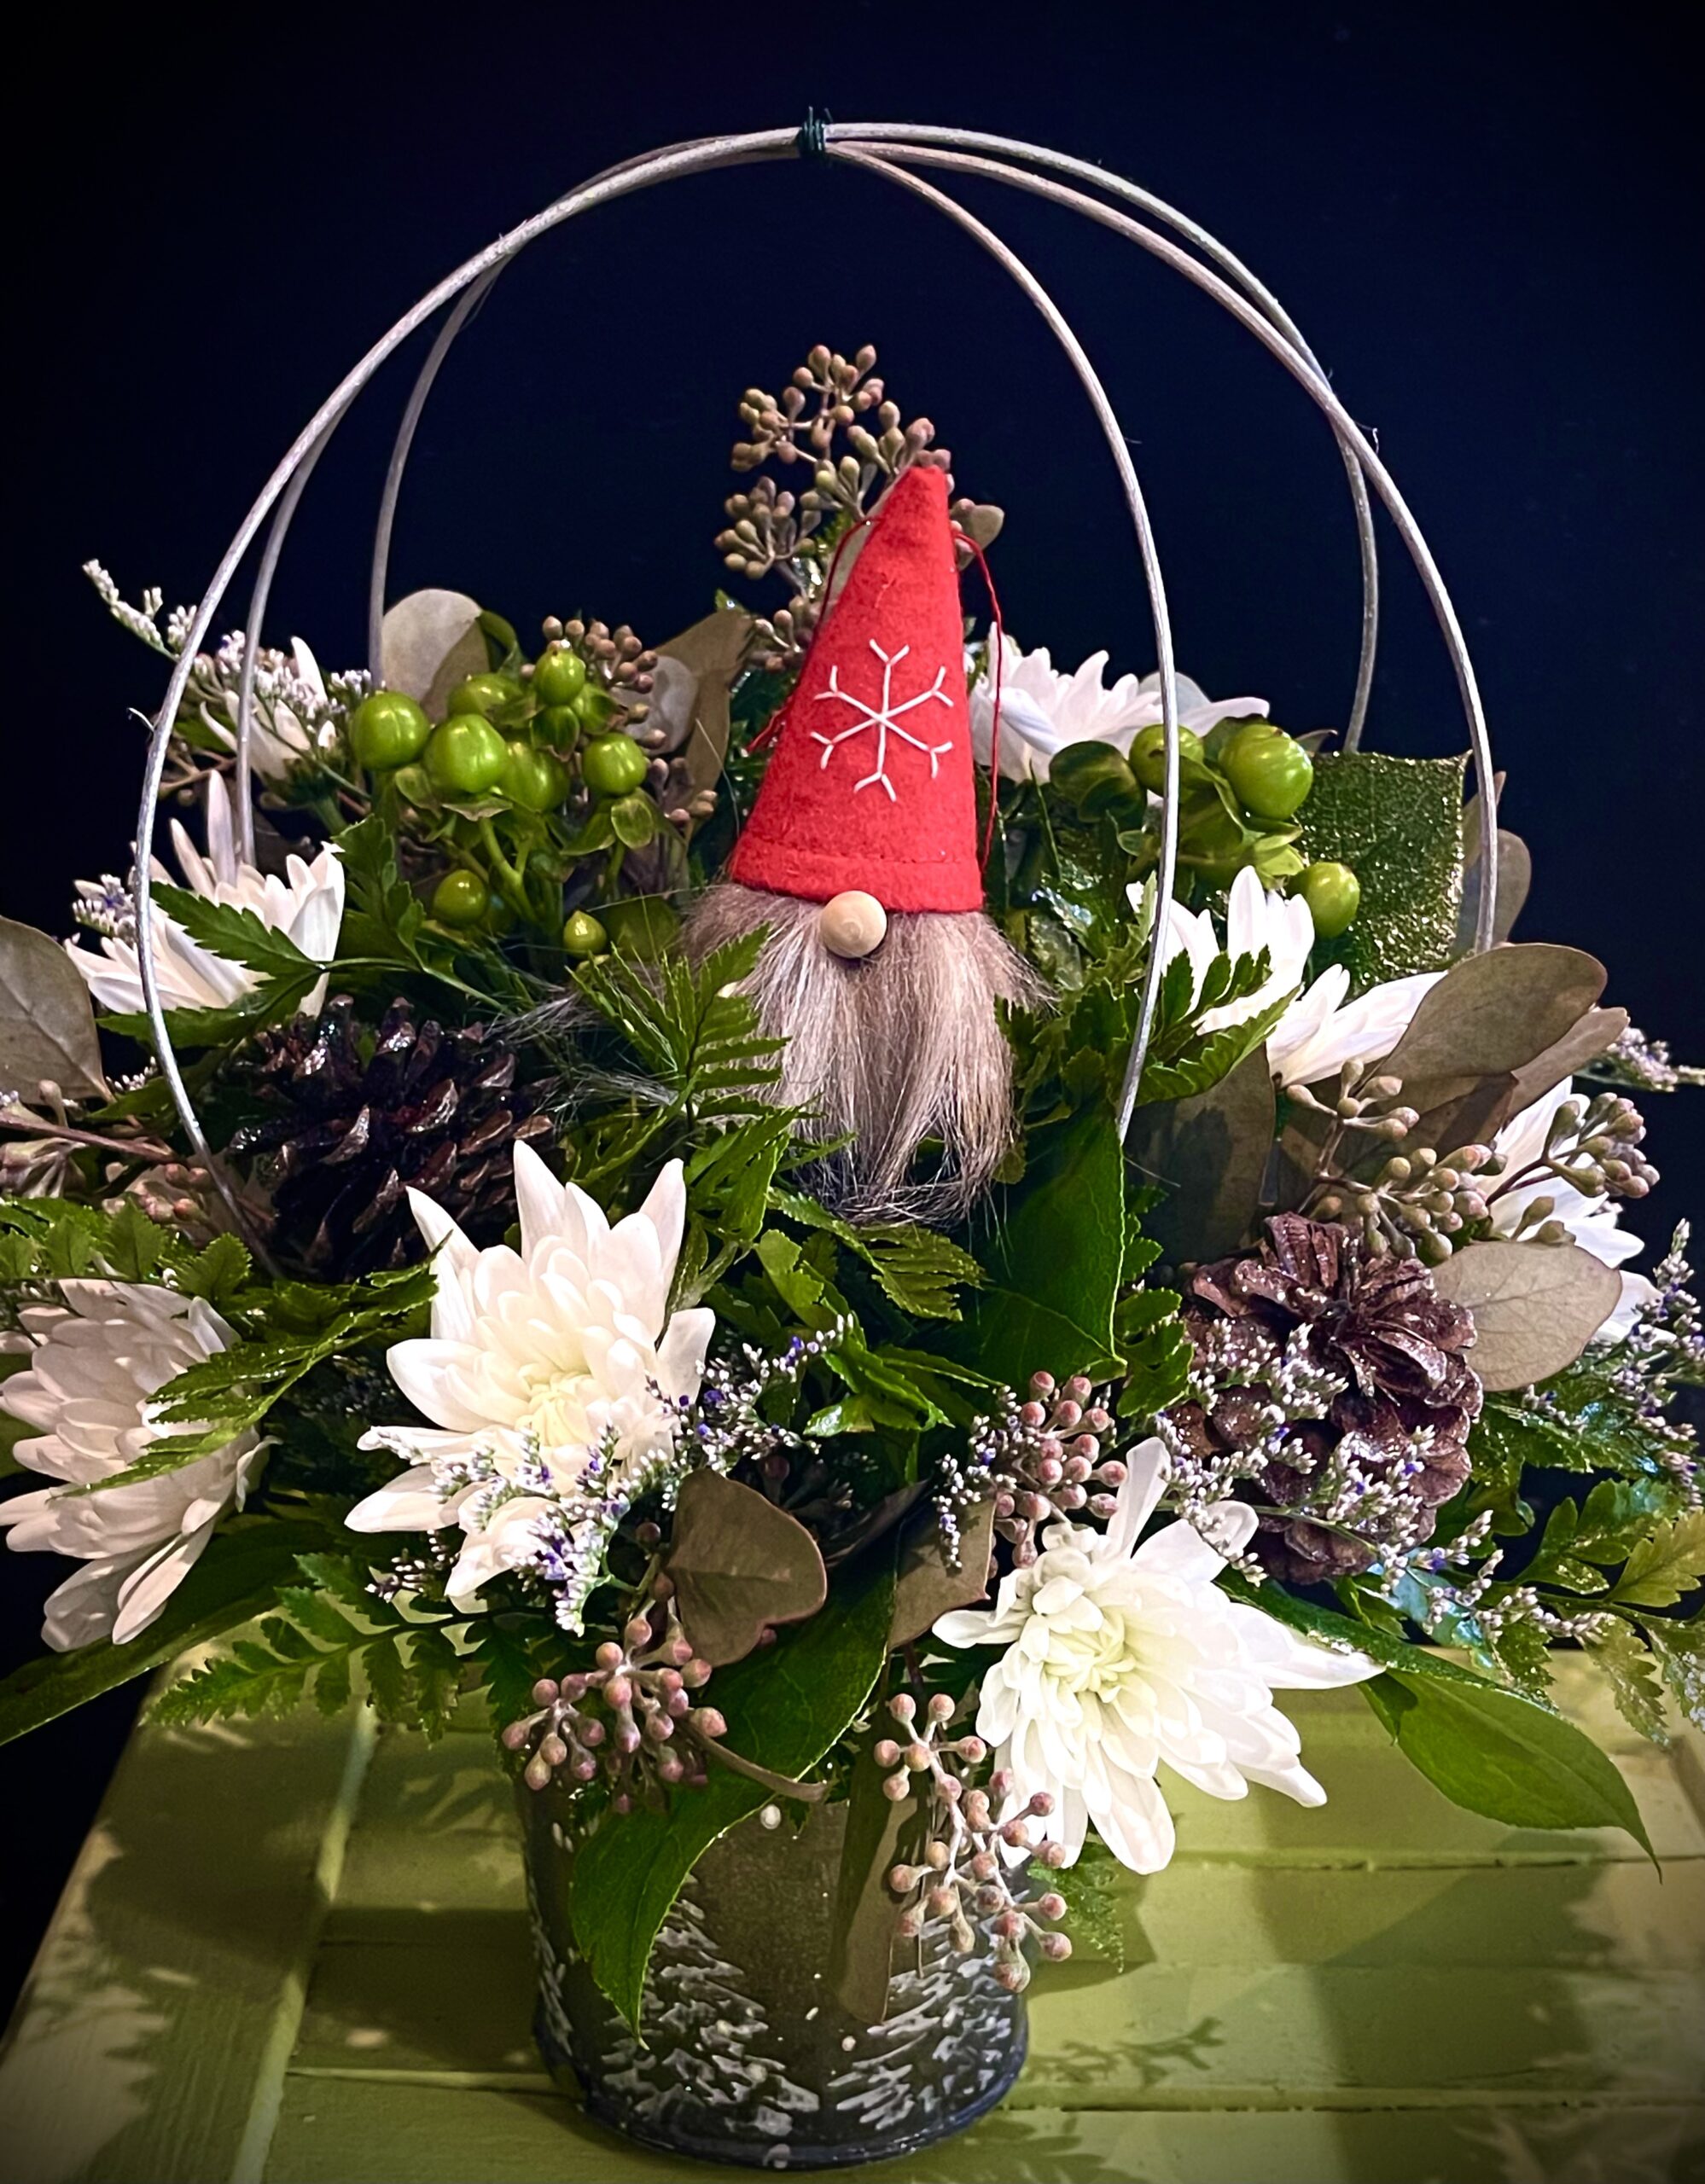 These Winter Floral Arrangements Will Upgrade Your Seasonal Decor  Winter  floral arrangements, Christmas floral arrangements, Christmas flower  arrangements